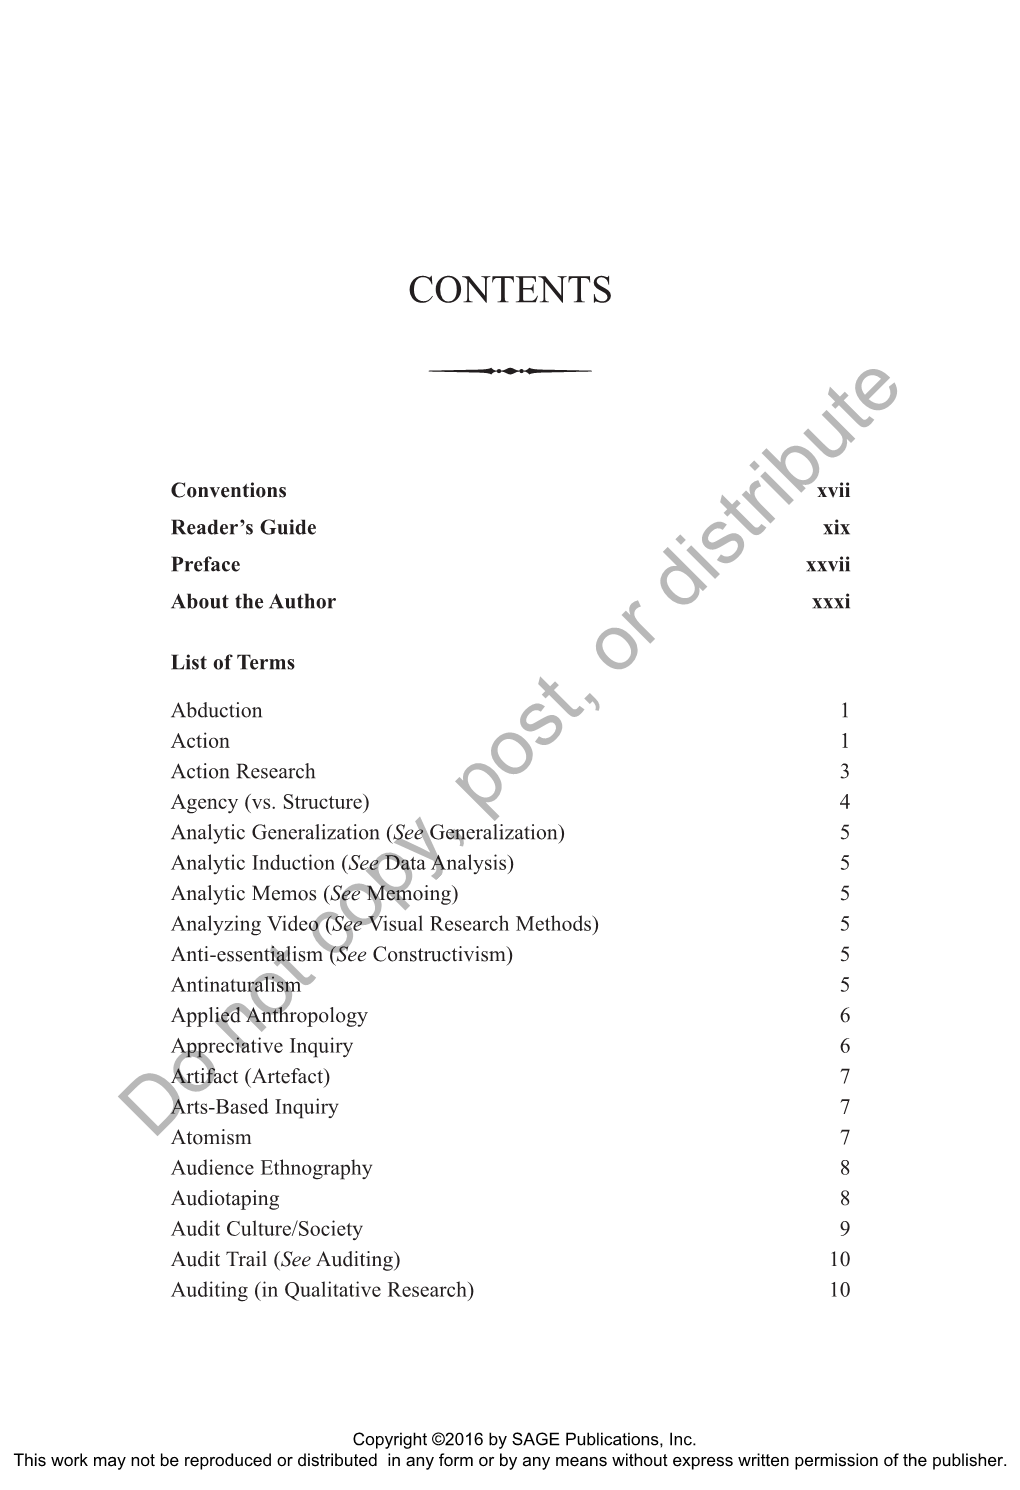 CONTENTS • Conventions Xvii Reader’S Guide Xix Preface Xxvii About the Author Distributexxxi List of Terms Or Abduction 1 Action 1 Action Research 3 Agency (Vs